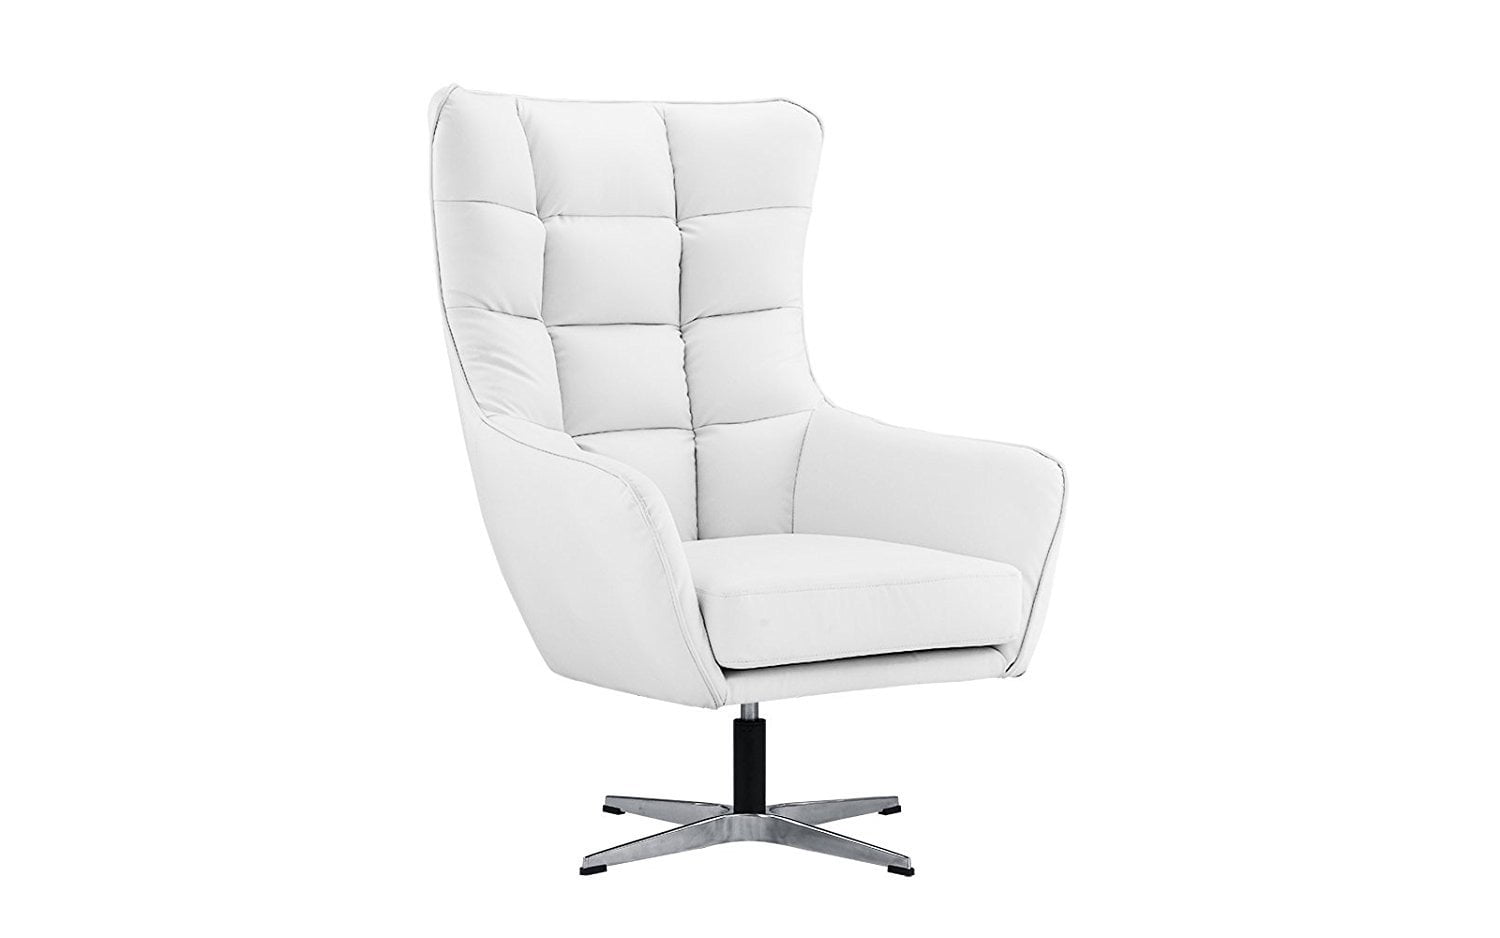 White Swivel Chairs For Living Room